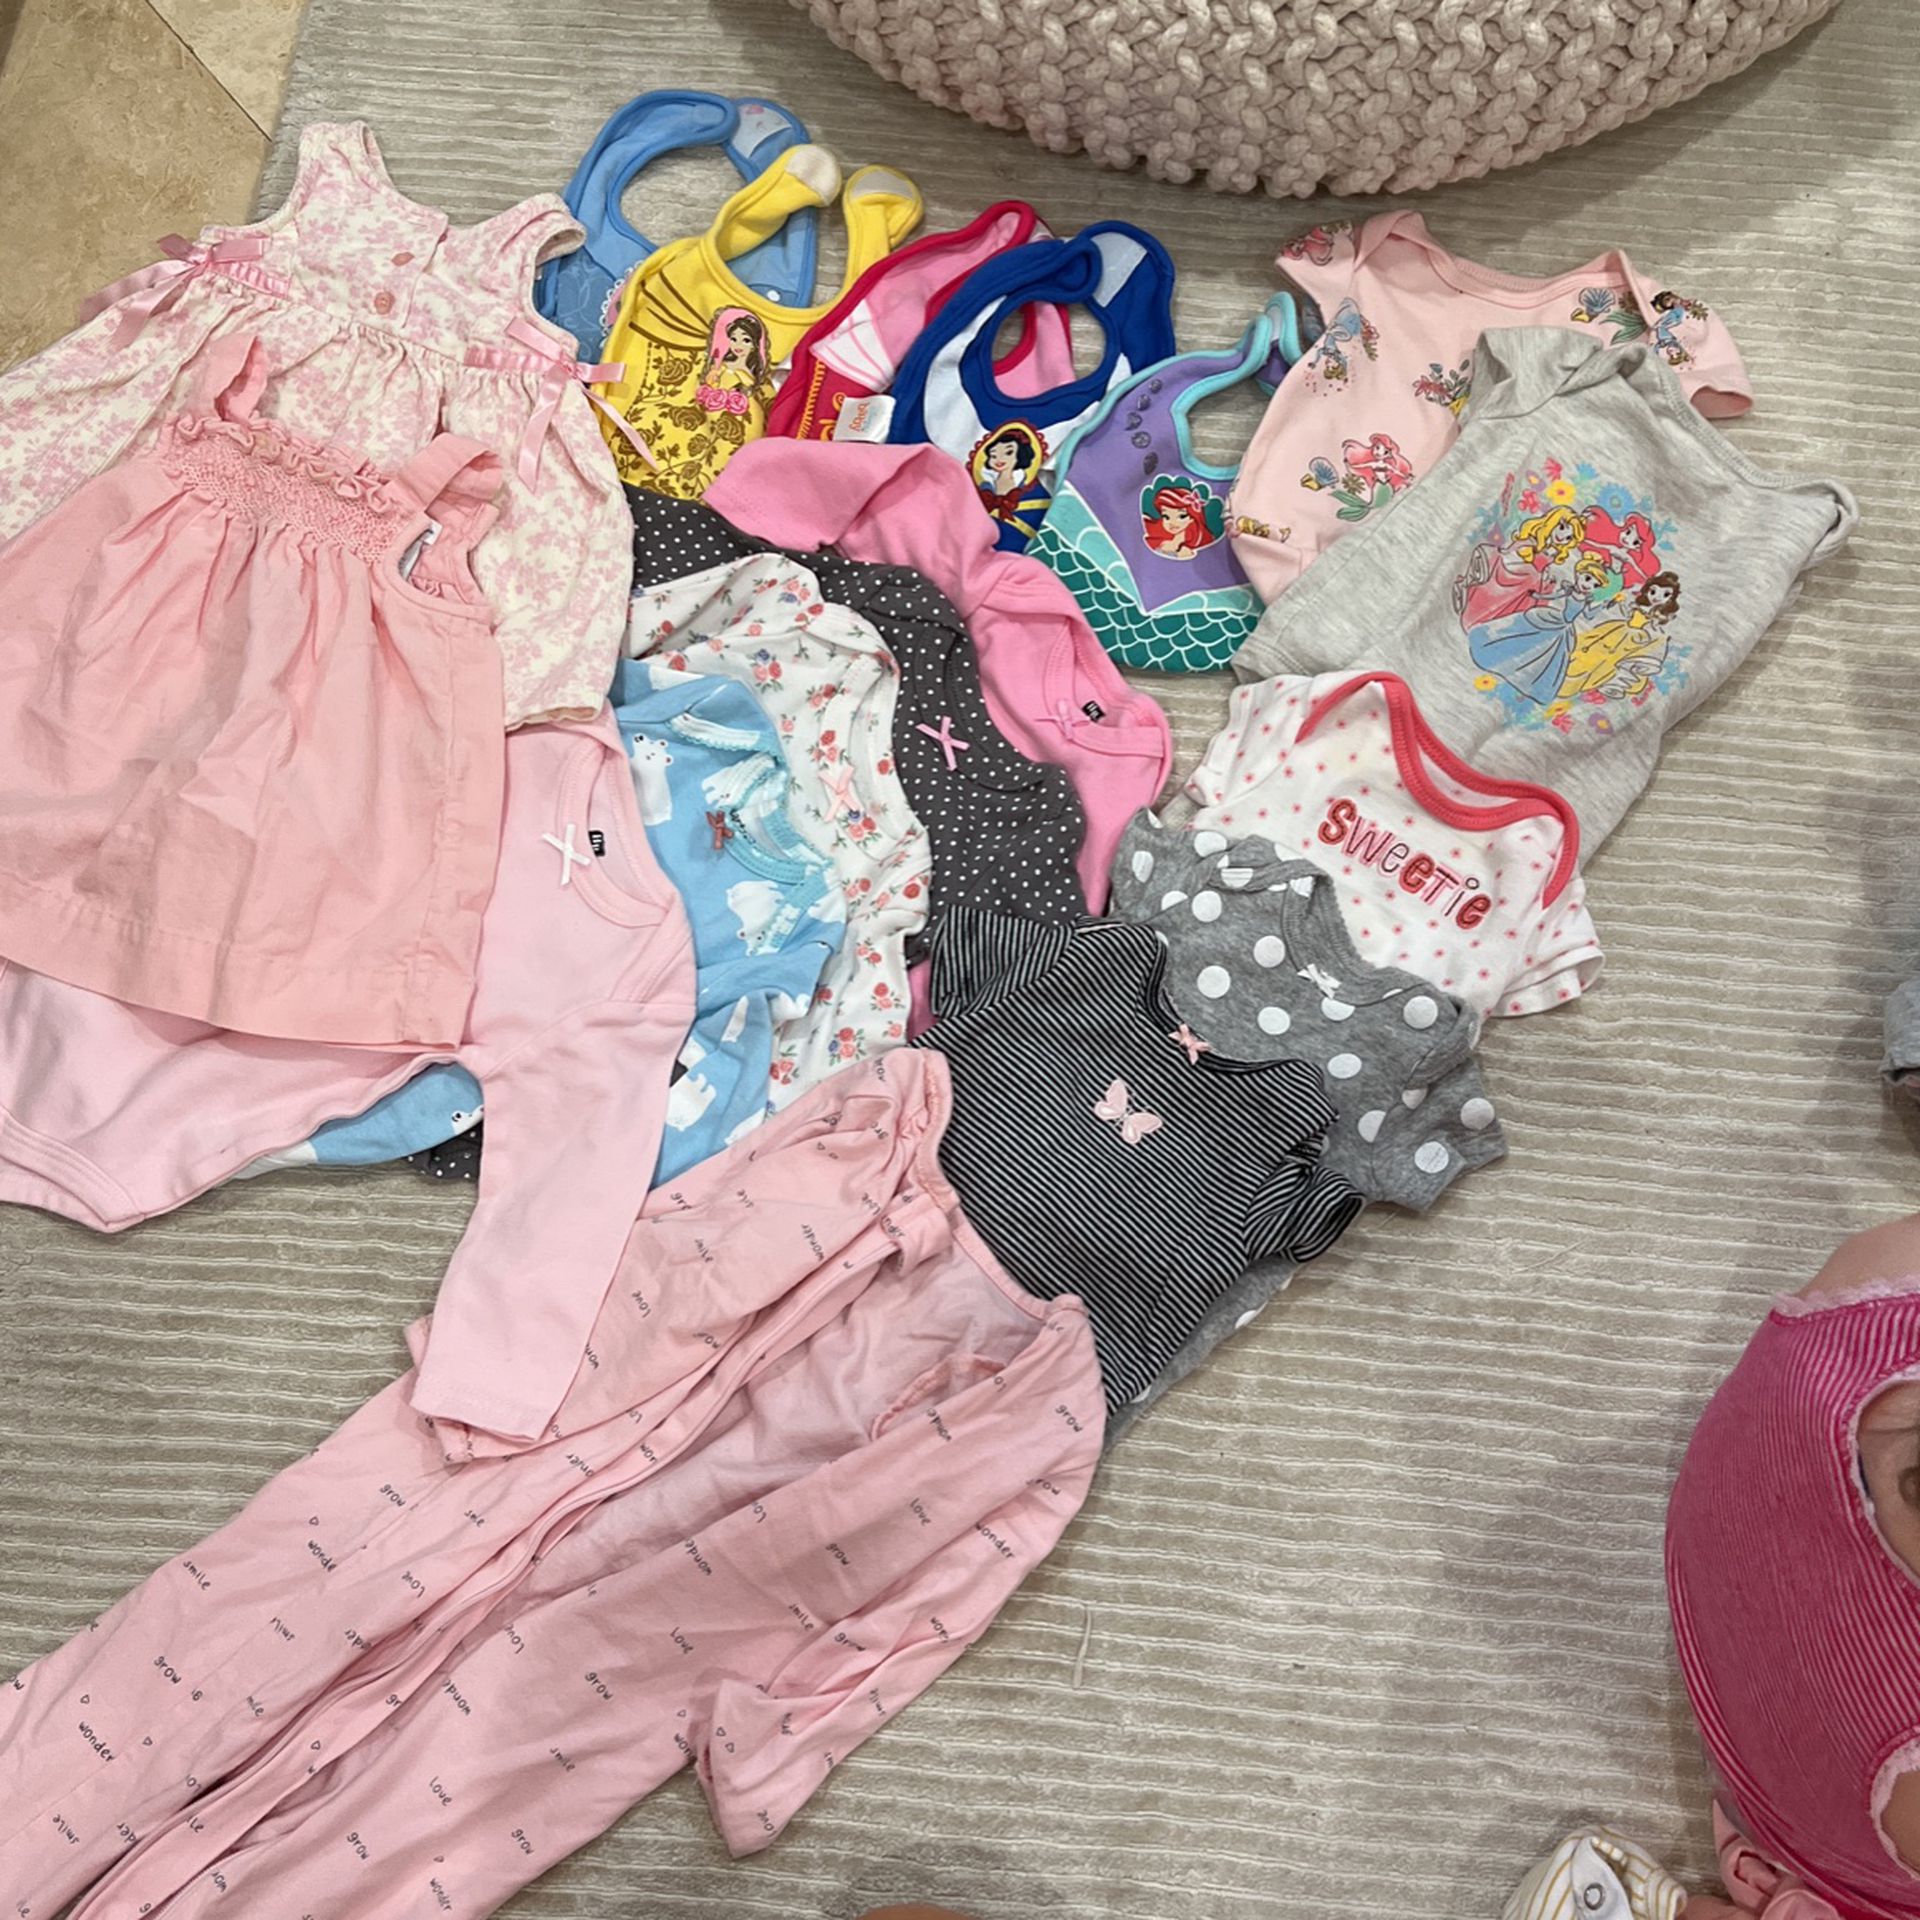 Baby Clothes And Disney Bibs